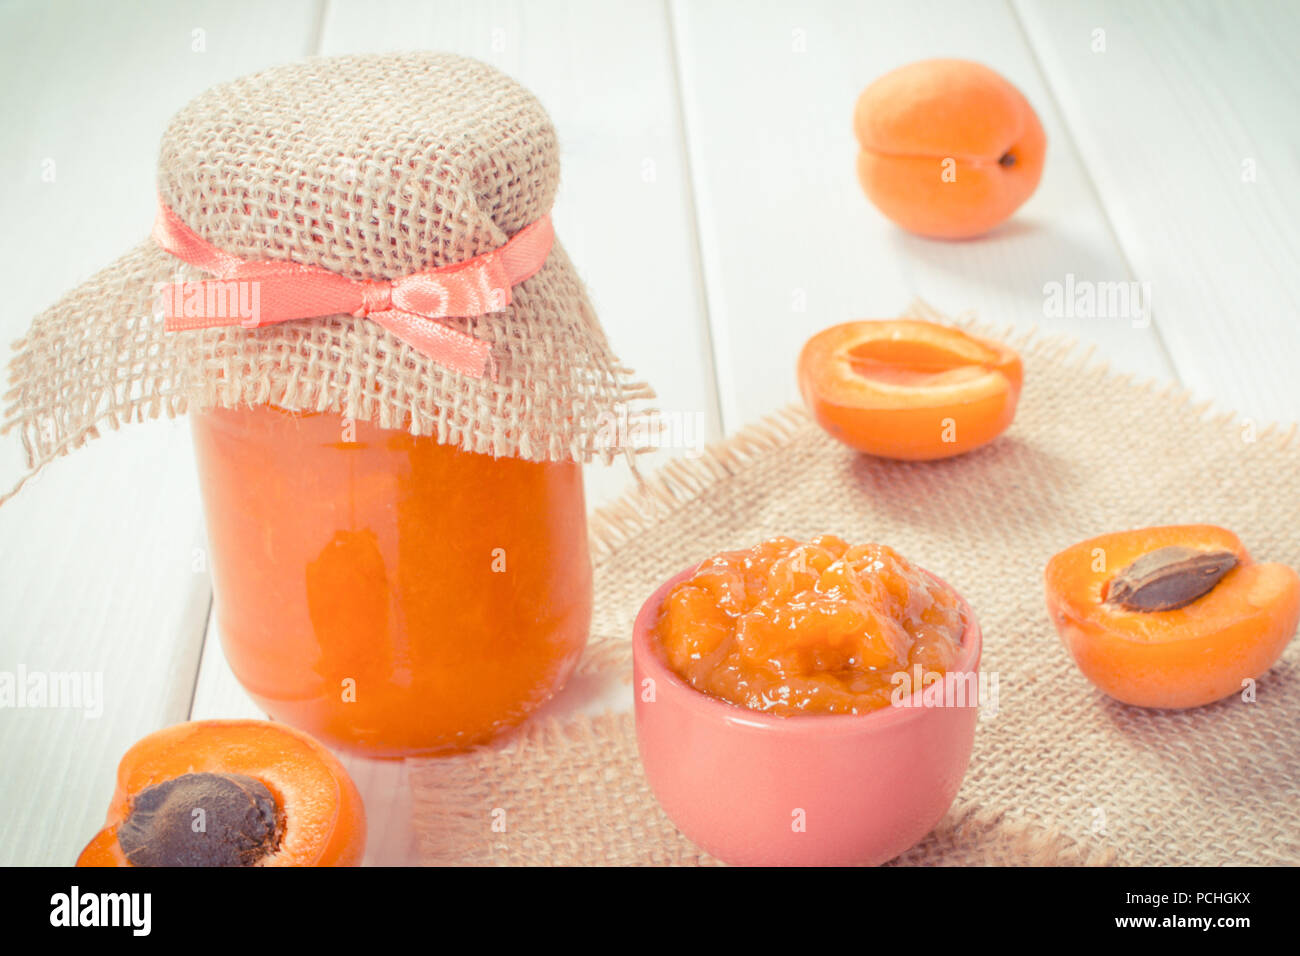 Vintage photo, Fresh prepared apricot jam or marmalade and ripe fruits, concept of healthy sweet dessert Stock Photo